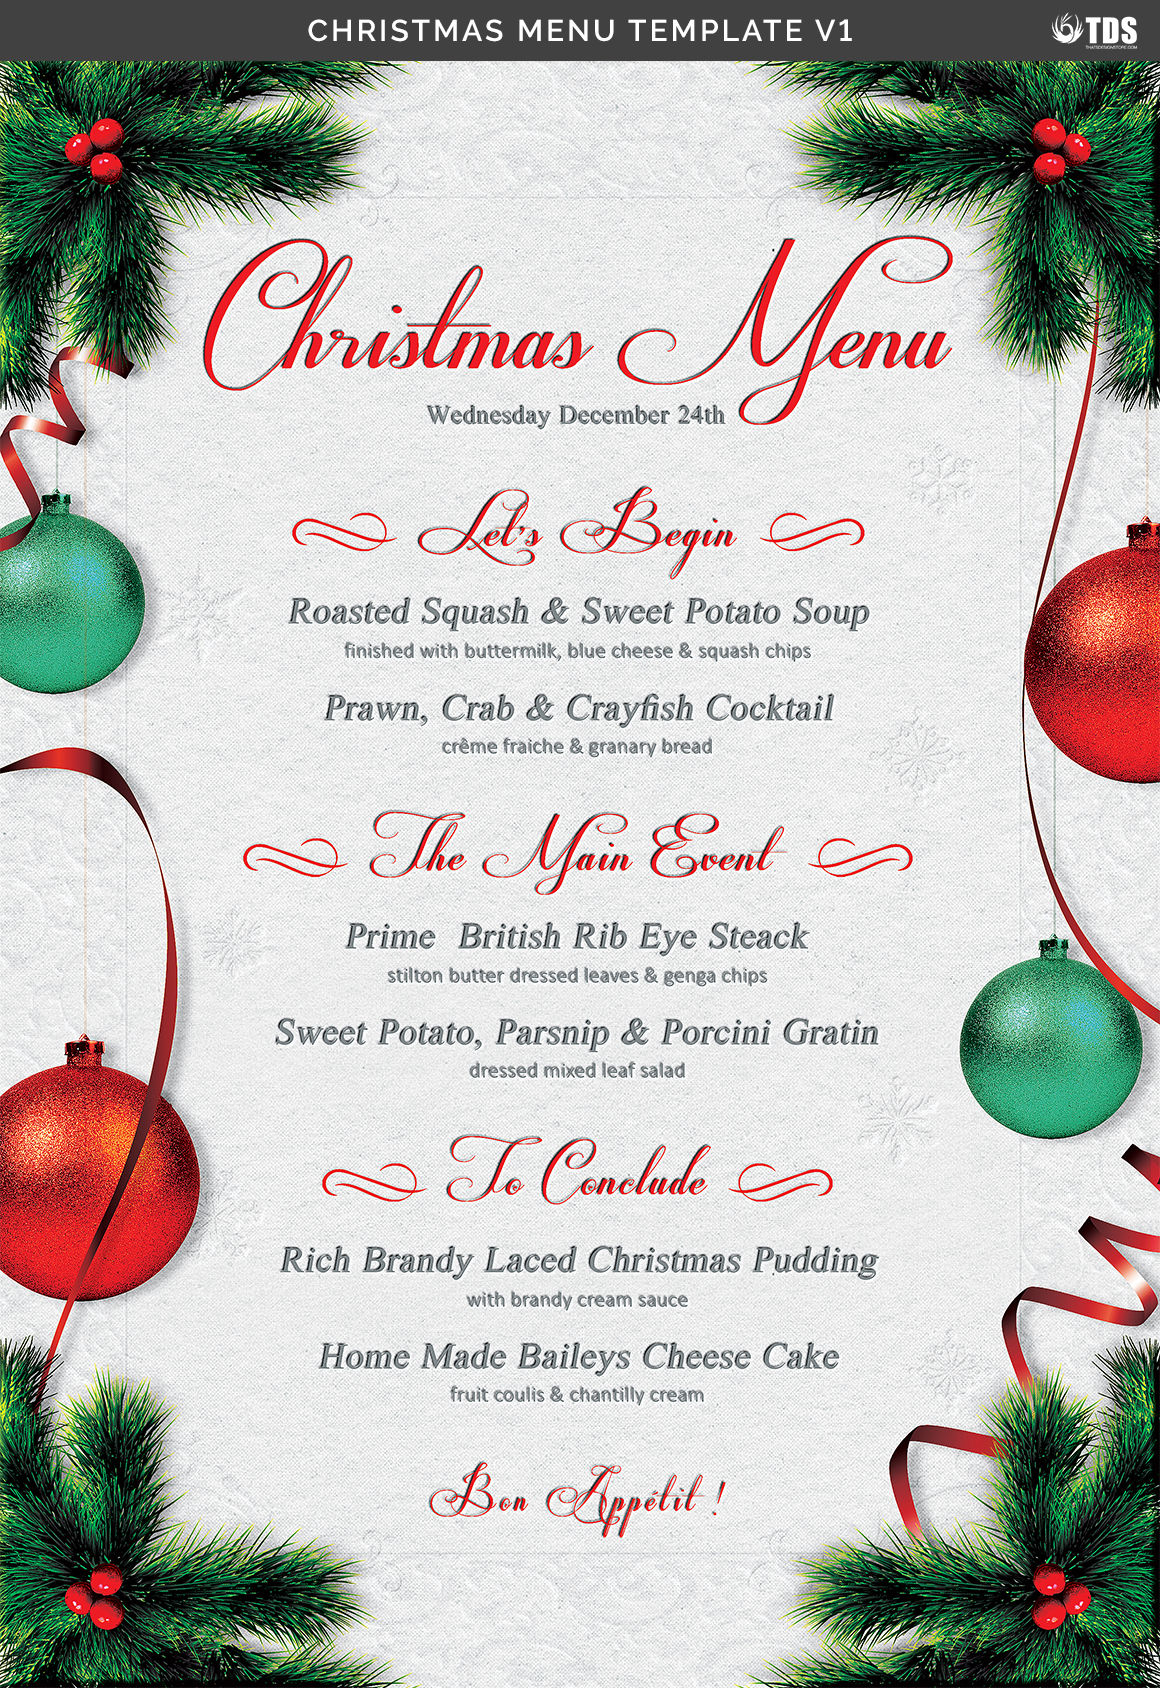 Christmas Menu Template V1 By Thats Design Store